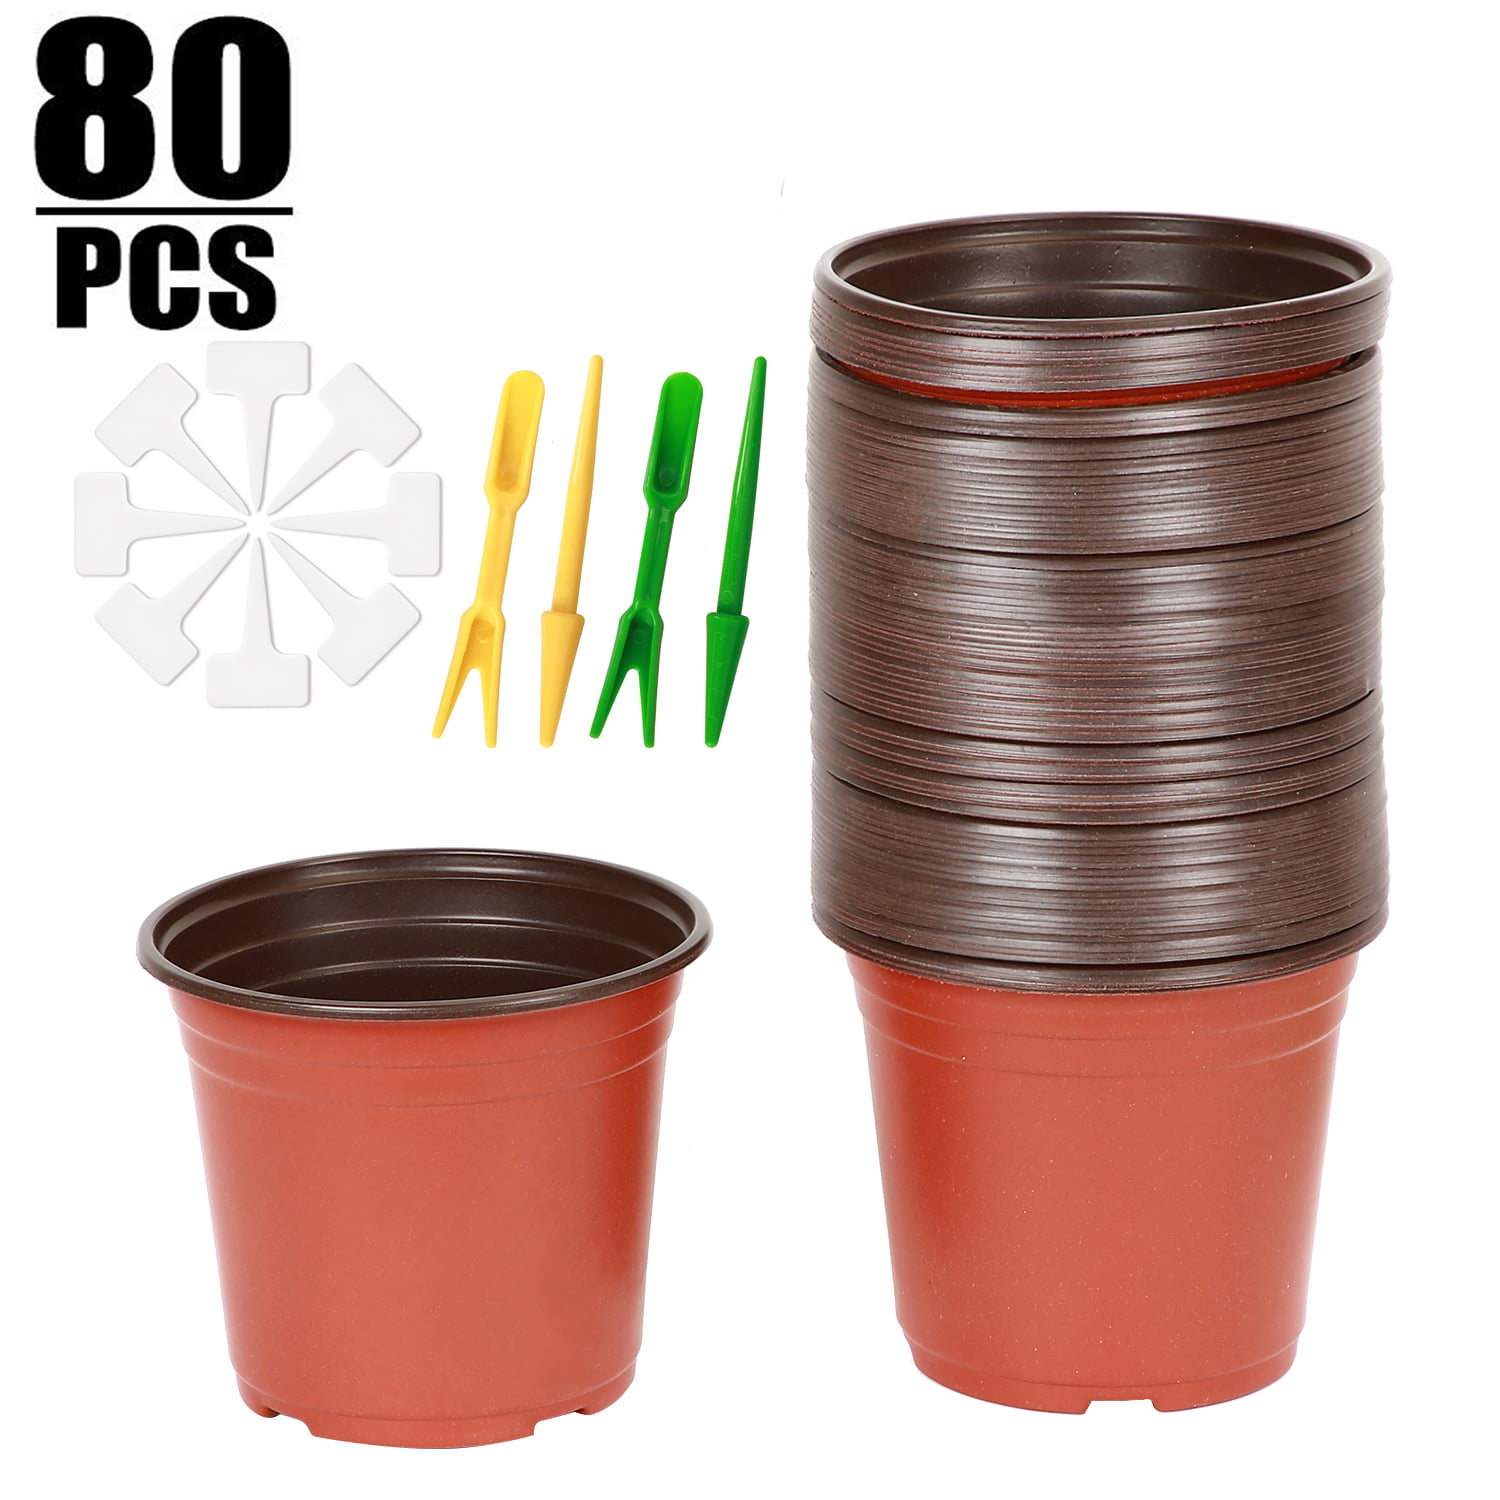 Plastic Pots for Plants Cuttings & Seedlings 4-Inch 30-Pack Color Terracotta New 